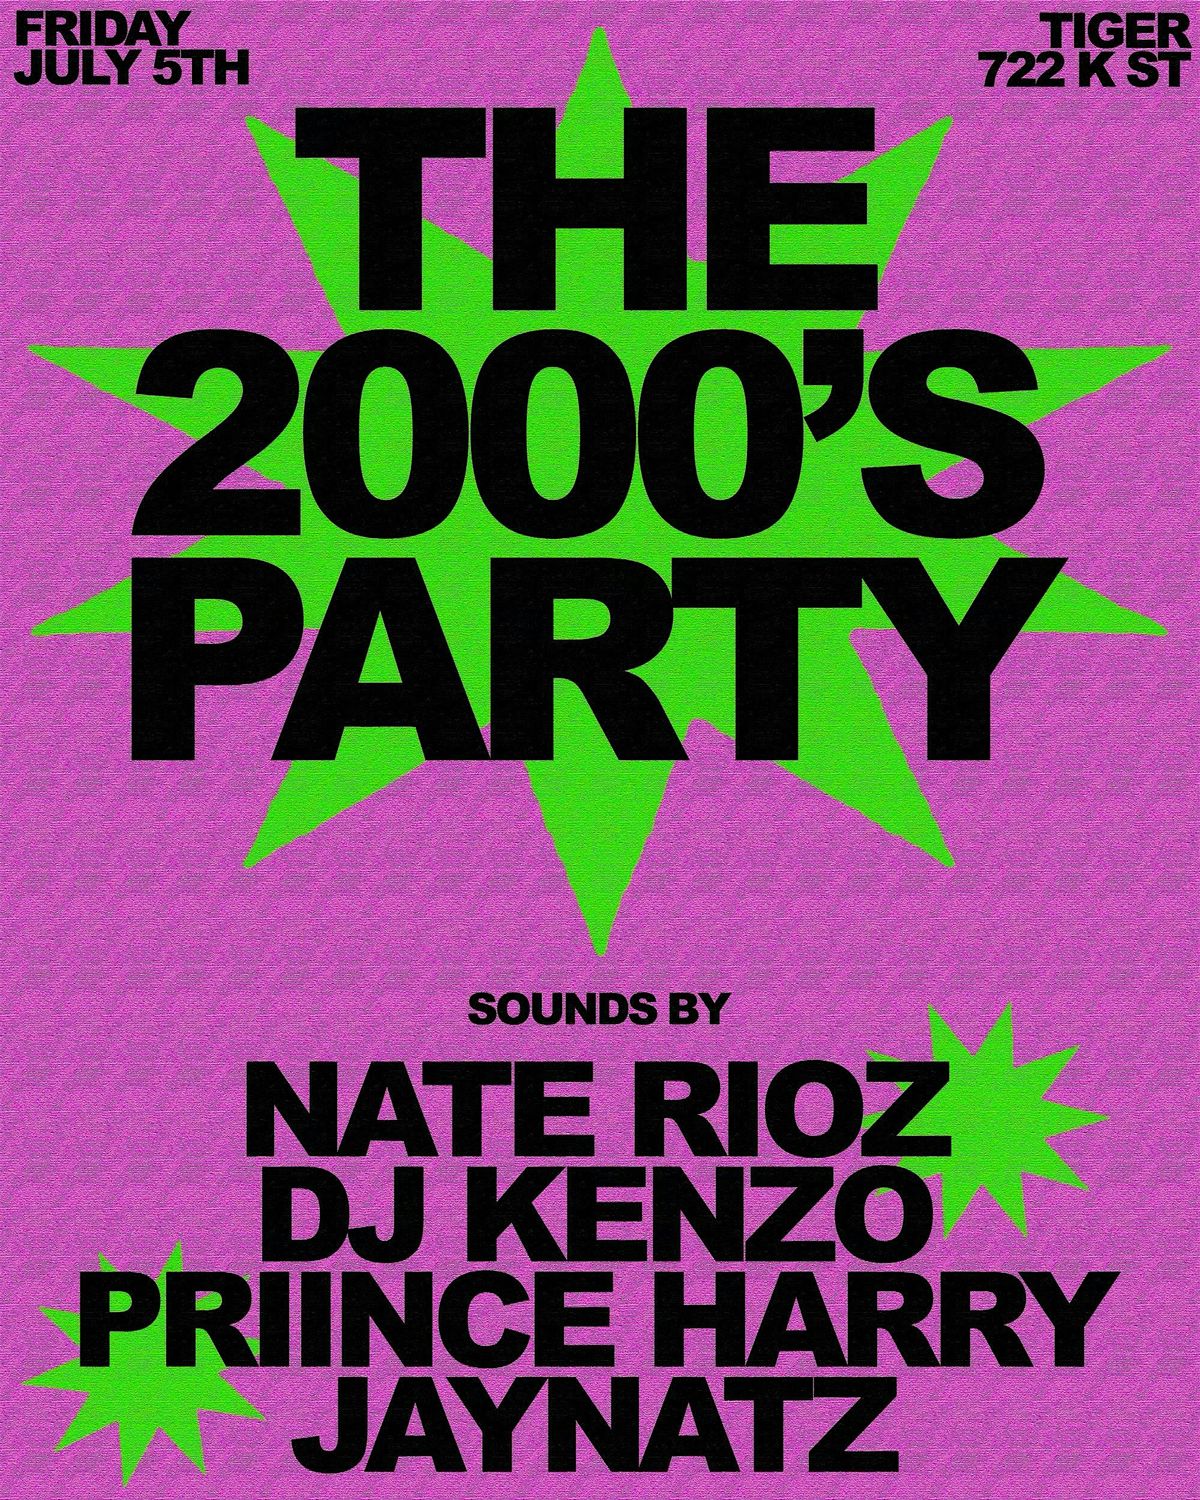 THE 2000'S PARTY @ TIGER \/\/ FRIDAY, JULY 5TH